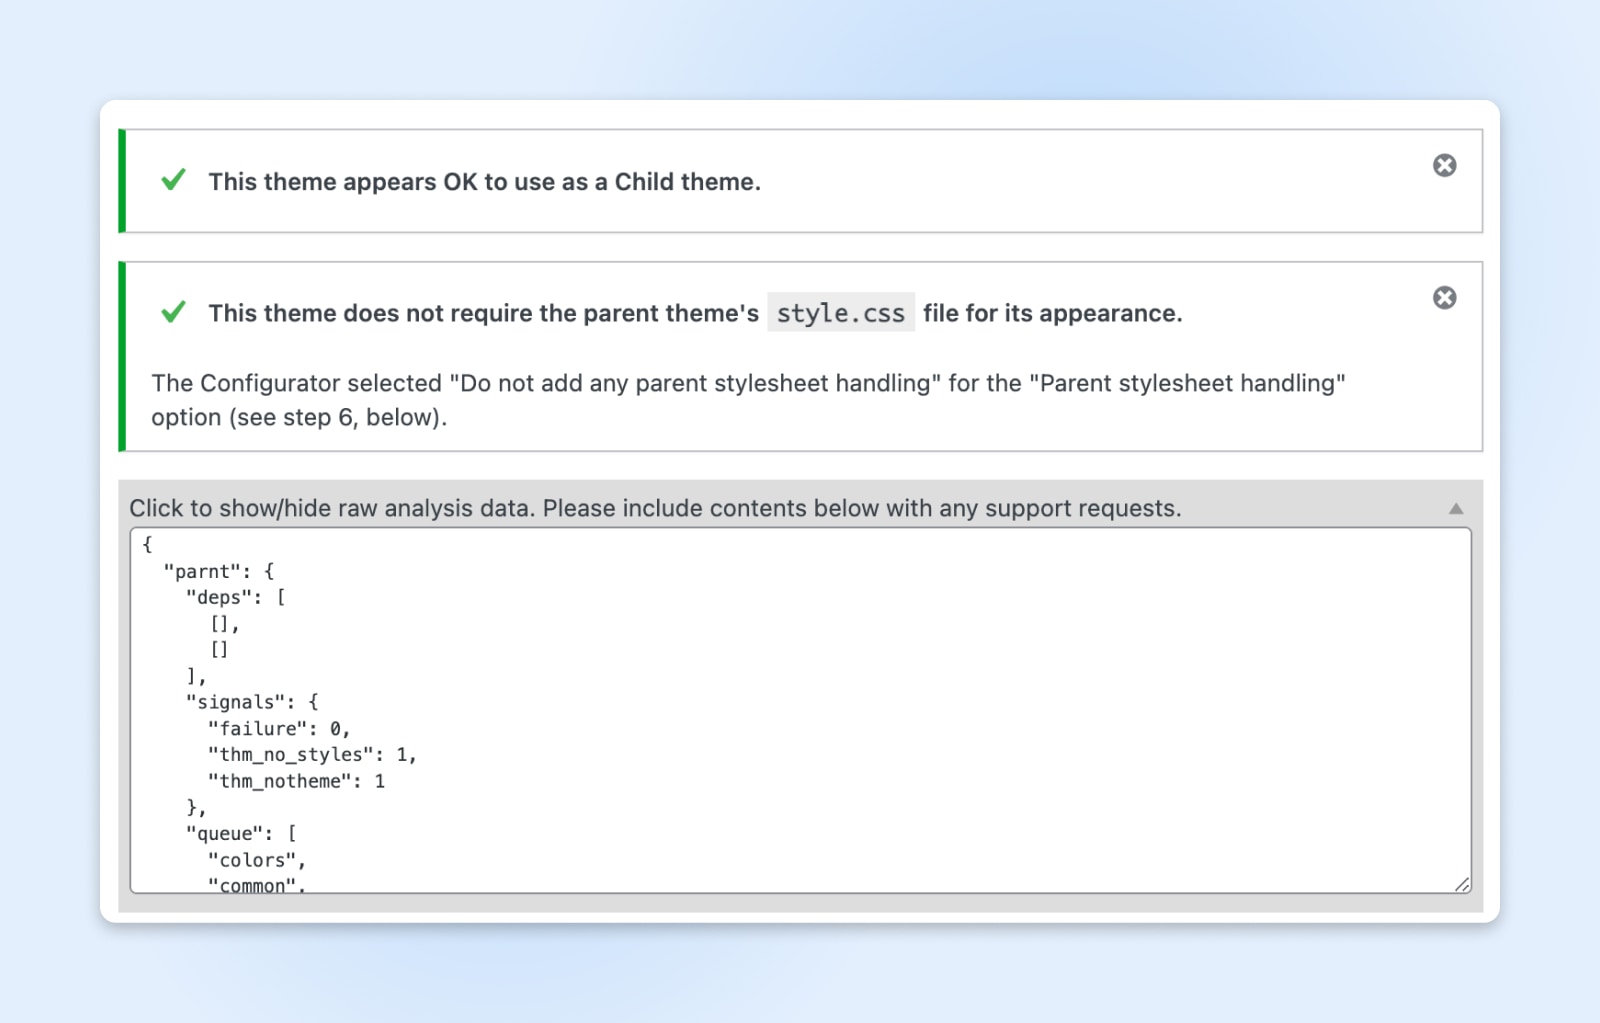 screenshot of the analysis page showing a check mark that this theme appears OK to use as a child theme and the relevant code